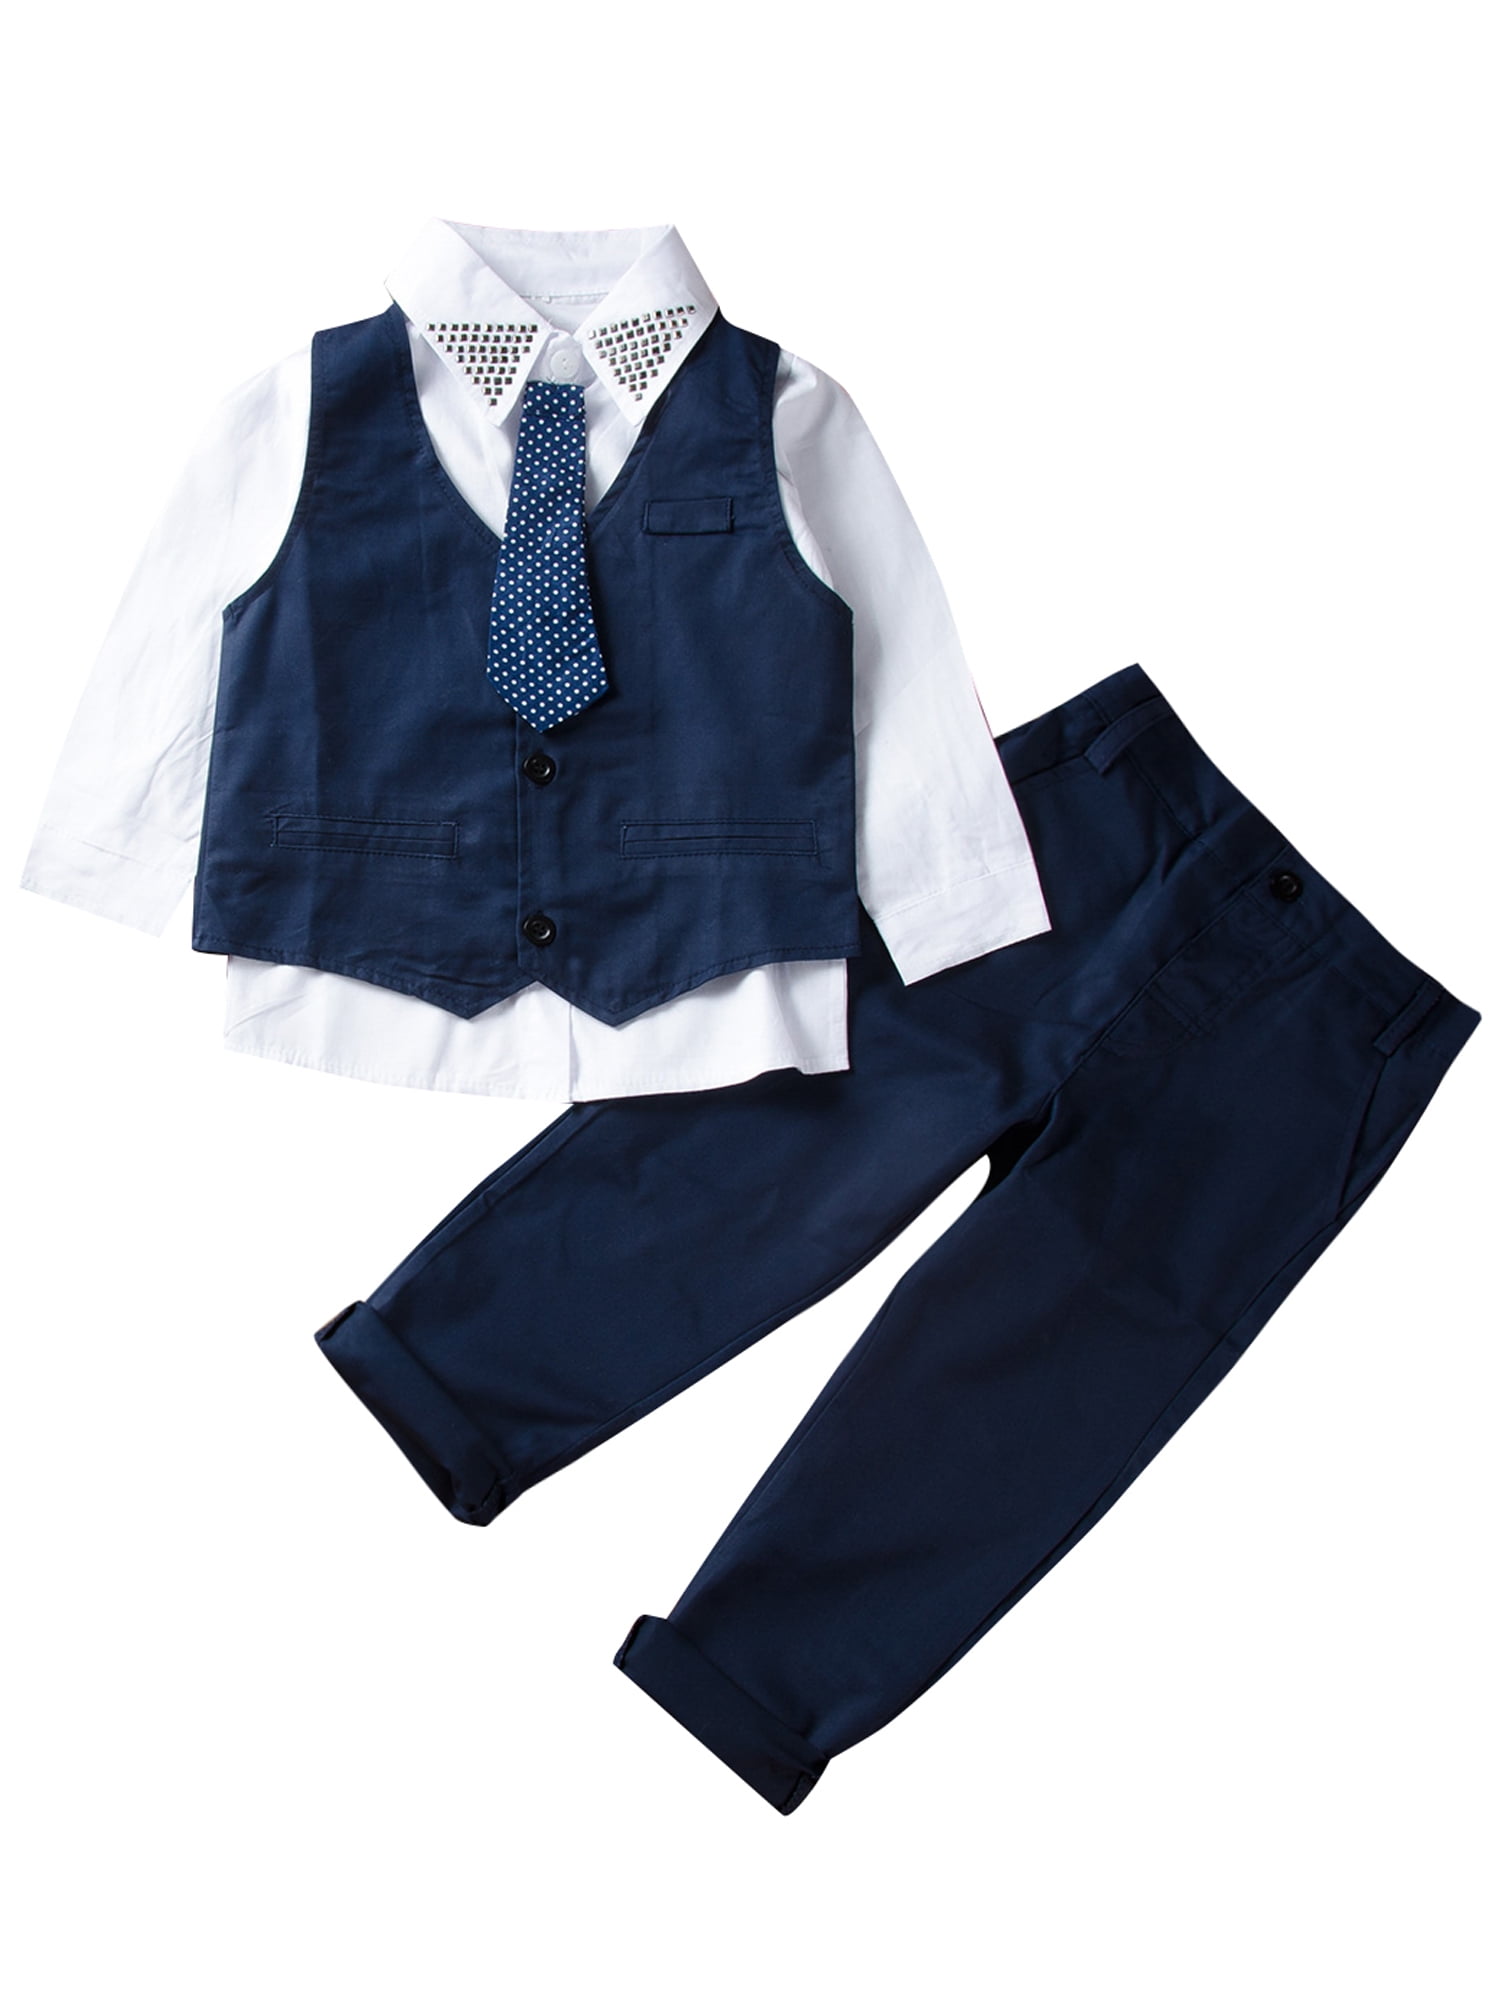 Toddler Kid Boy Wedding Christening Formal Suit Tie Waistcoat+Pants+Shirt Outfit 